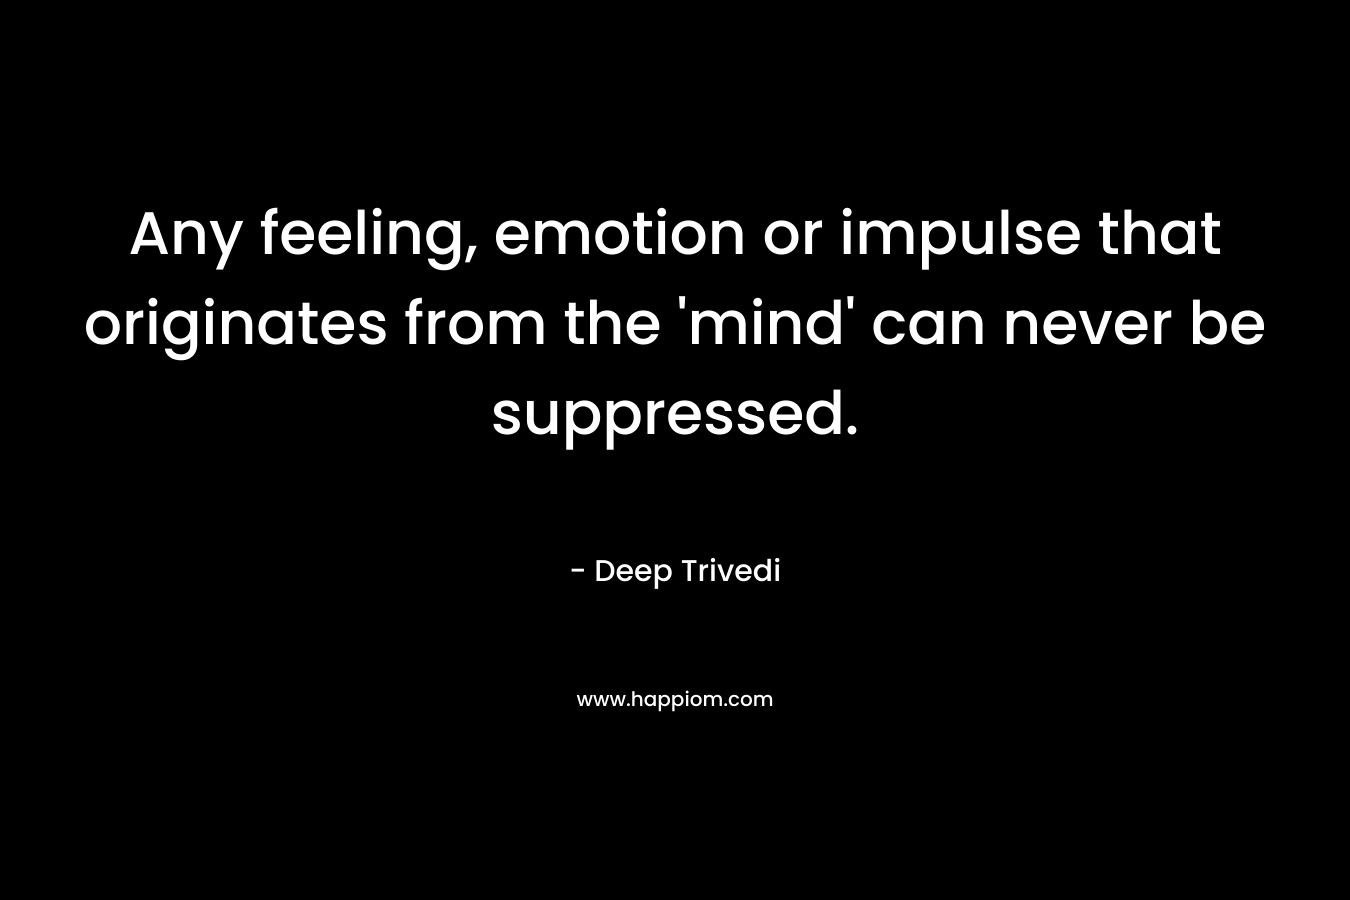 Any feeling, emotion or impulse that originates from the 'mind' can never be suppressed.